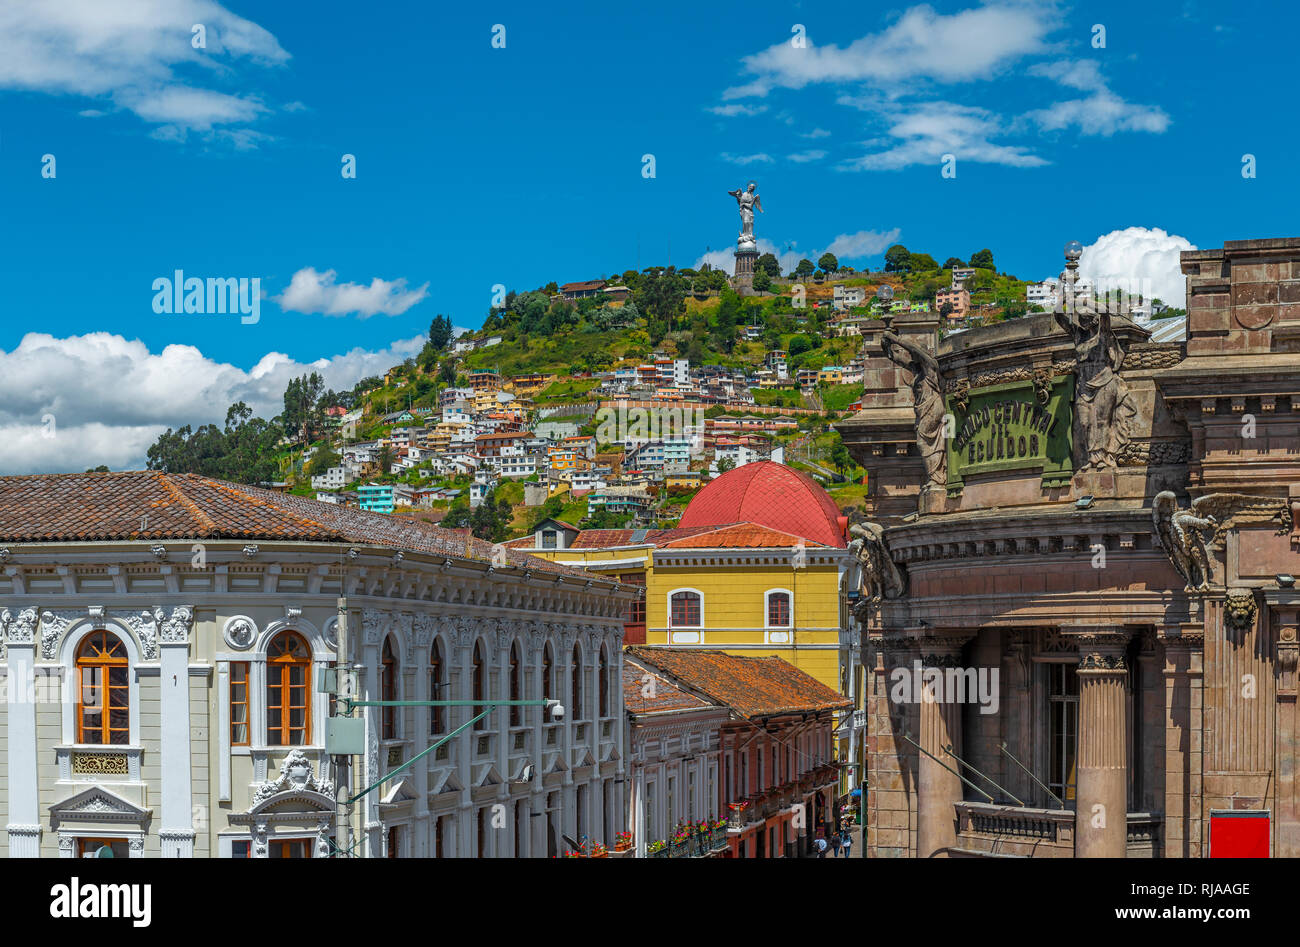 Cityscape of colonial architecture in the historic city center of Quito with the Panecillo hill and the Virgin of Quito in the background, Ecuador. Stock Photo